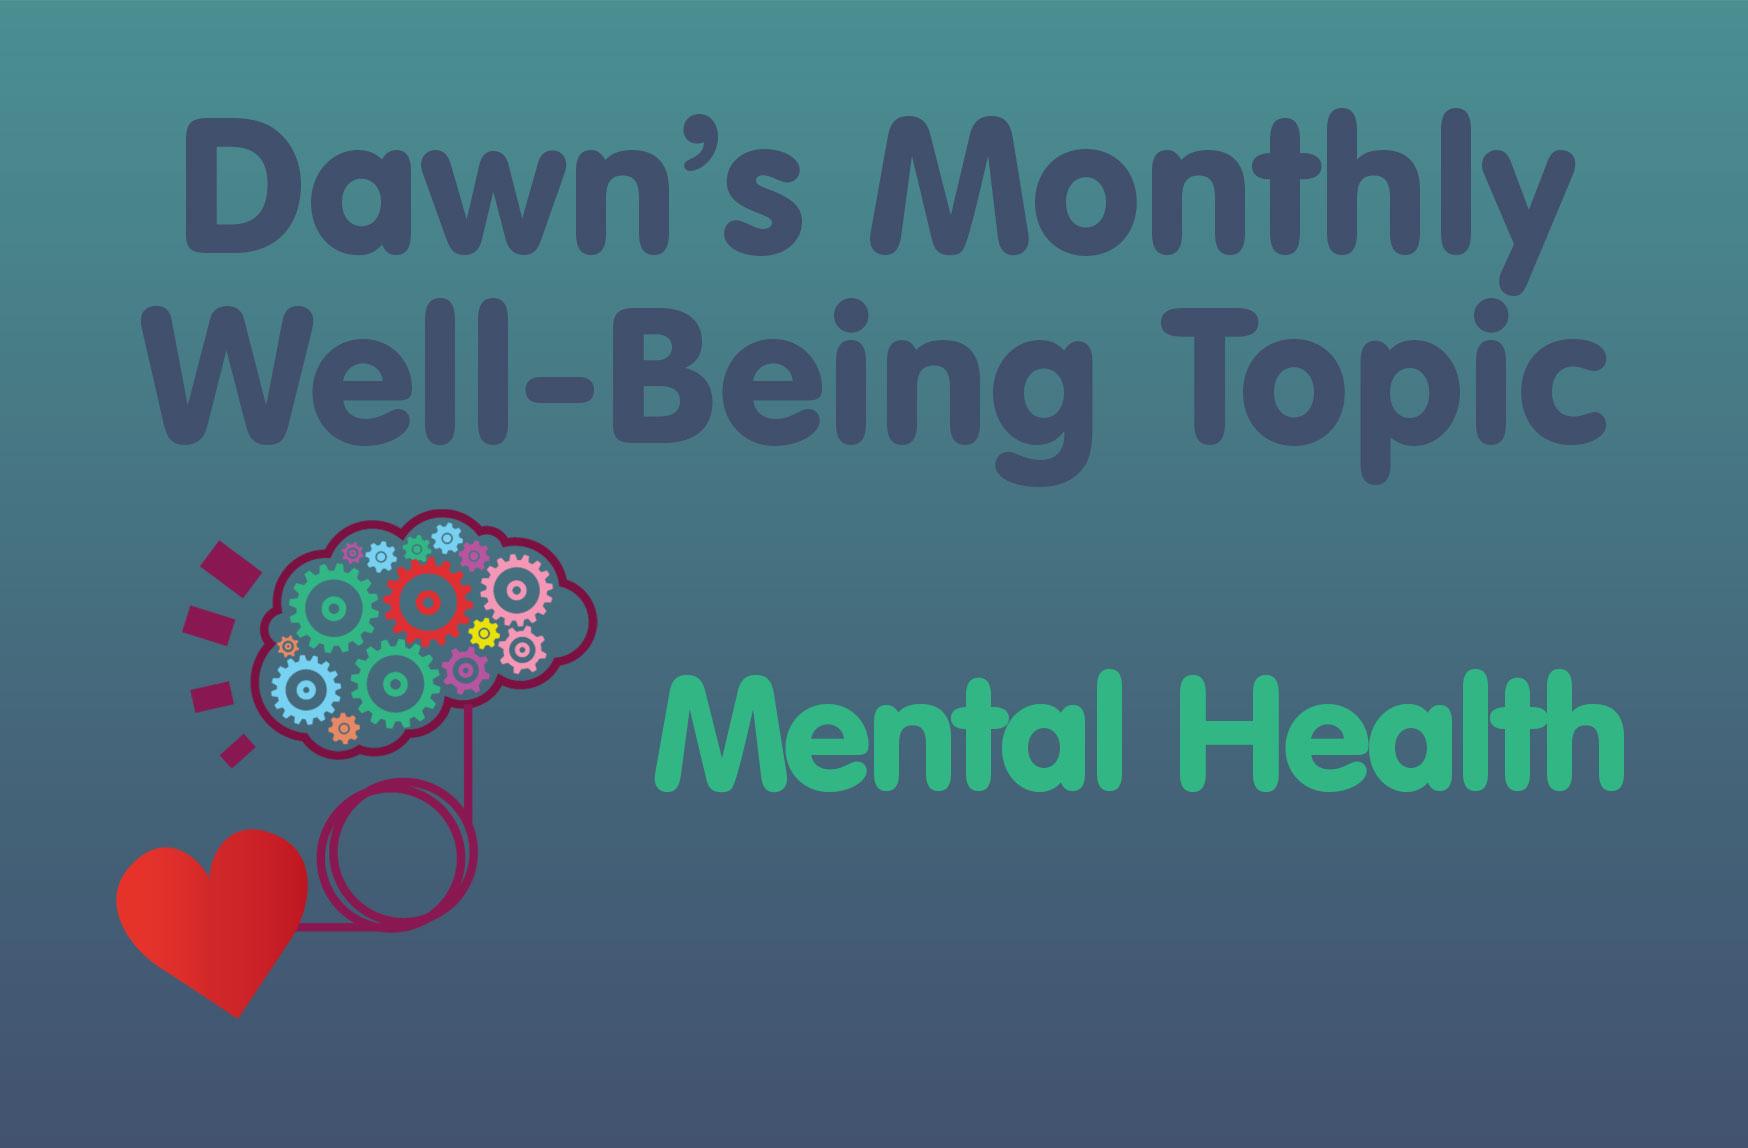 Dawn's monthly well-being post - Mental Health